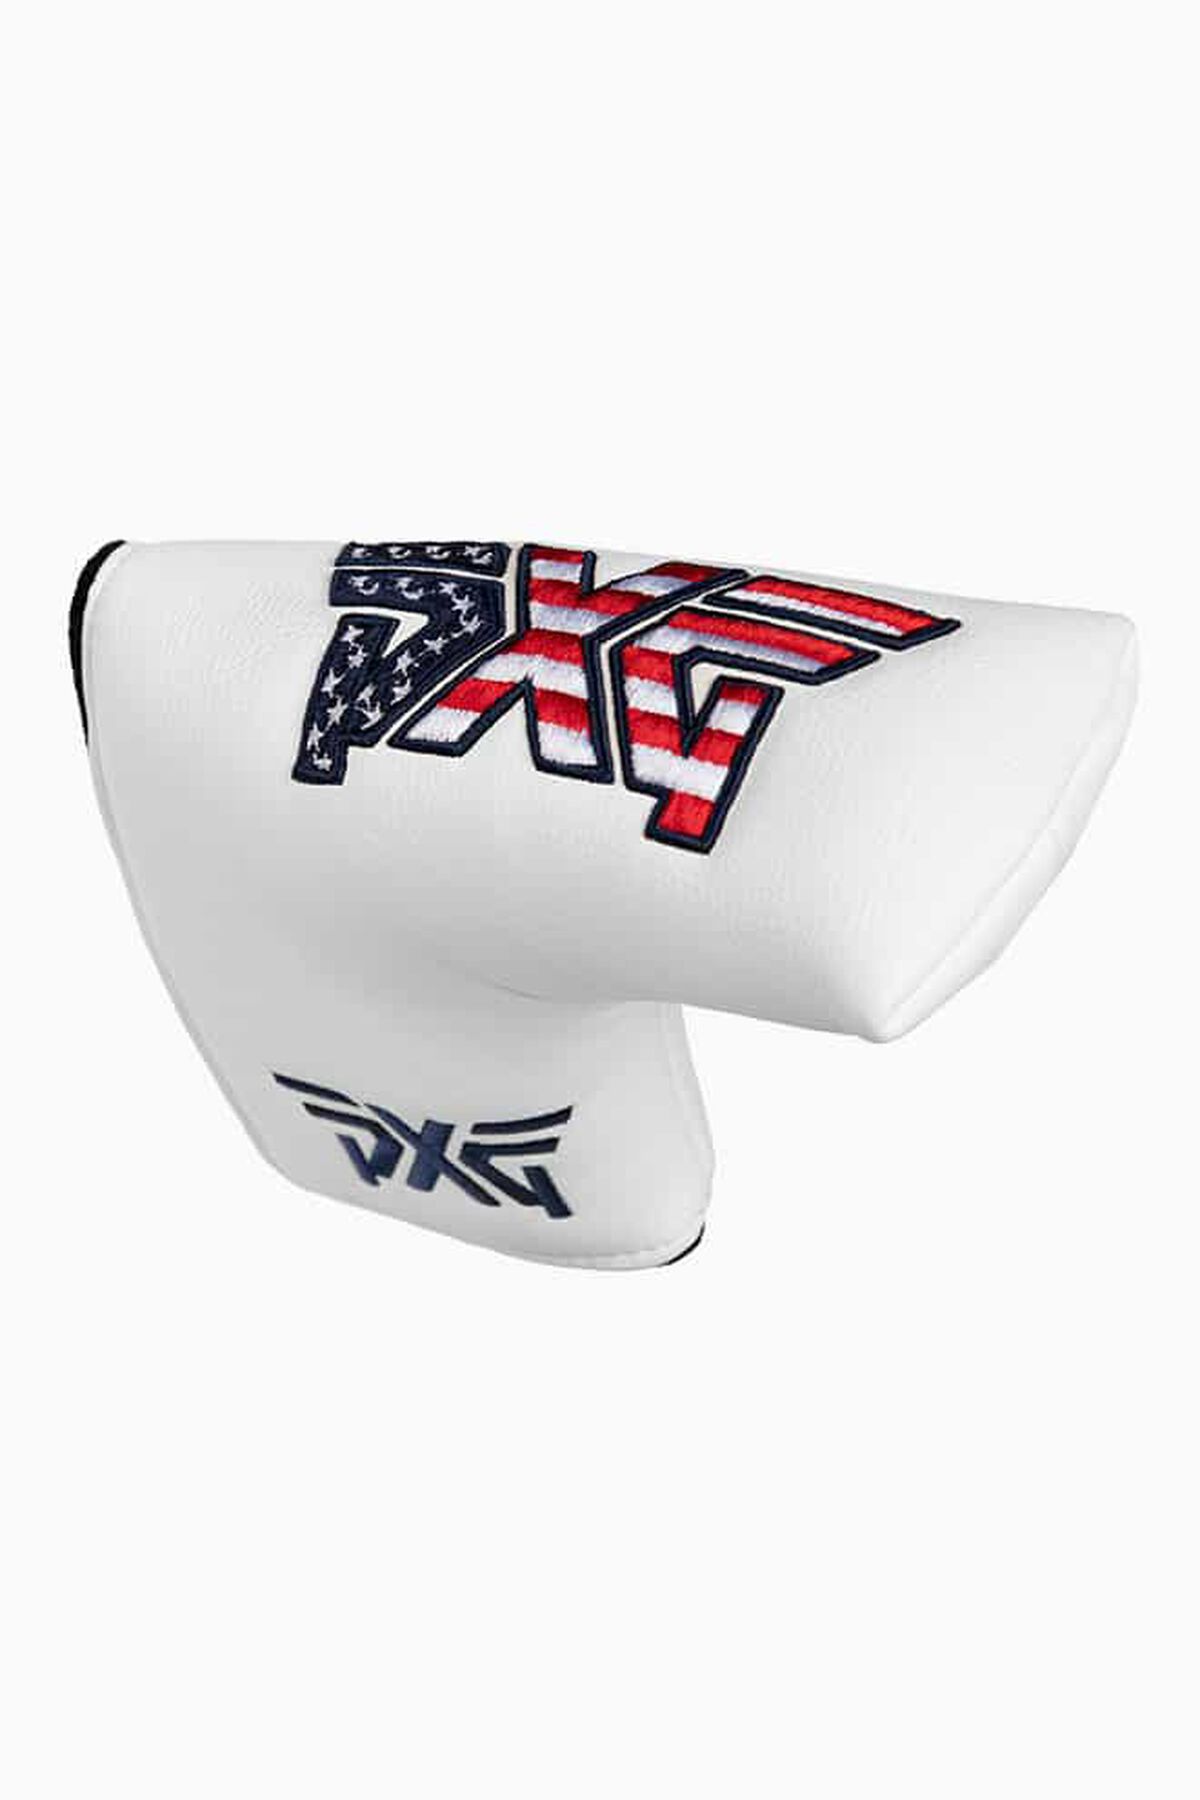 Pure Stars & Stripes Players Blade Putter Headcover 